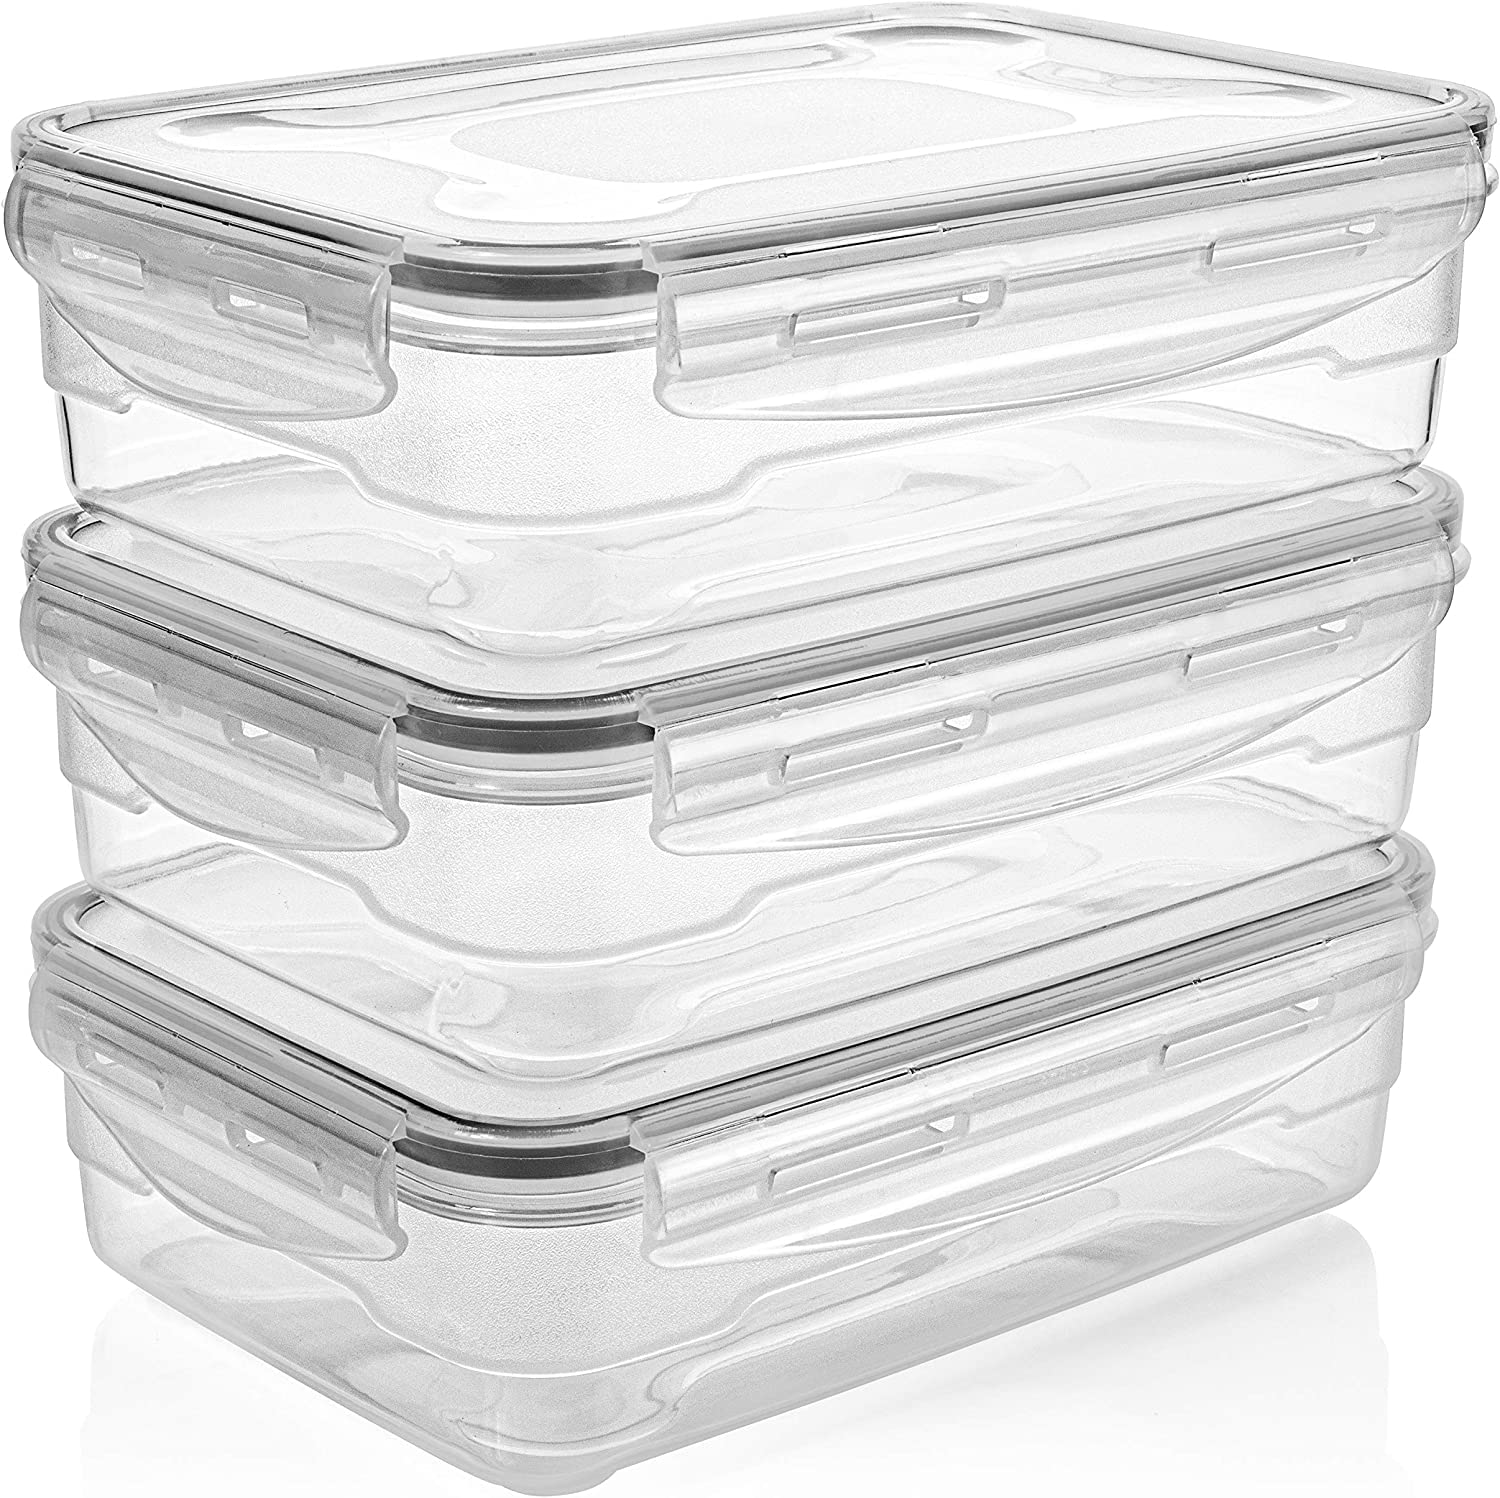 Lock in Freshness with Vacuum-Sealed Plastic Containers